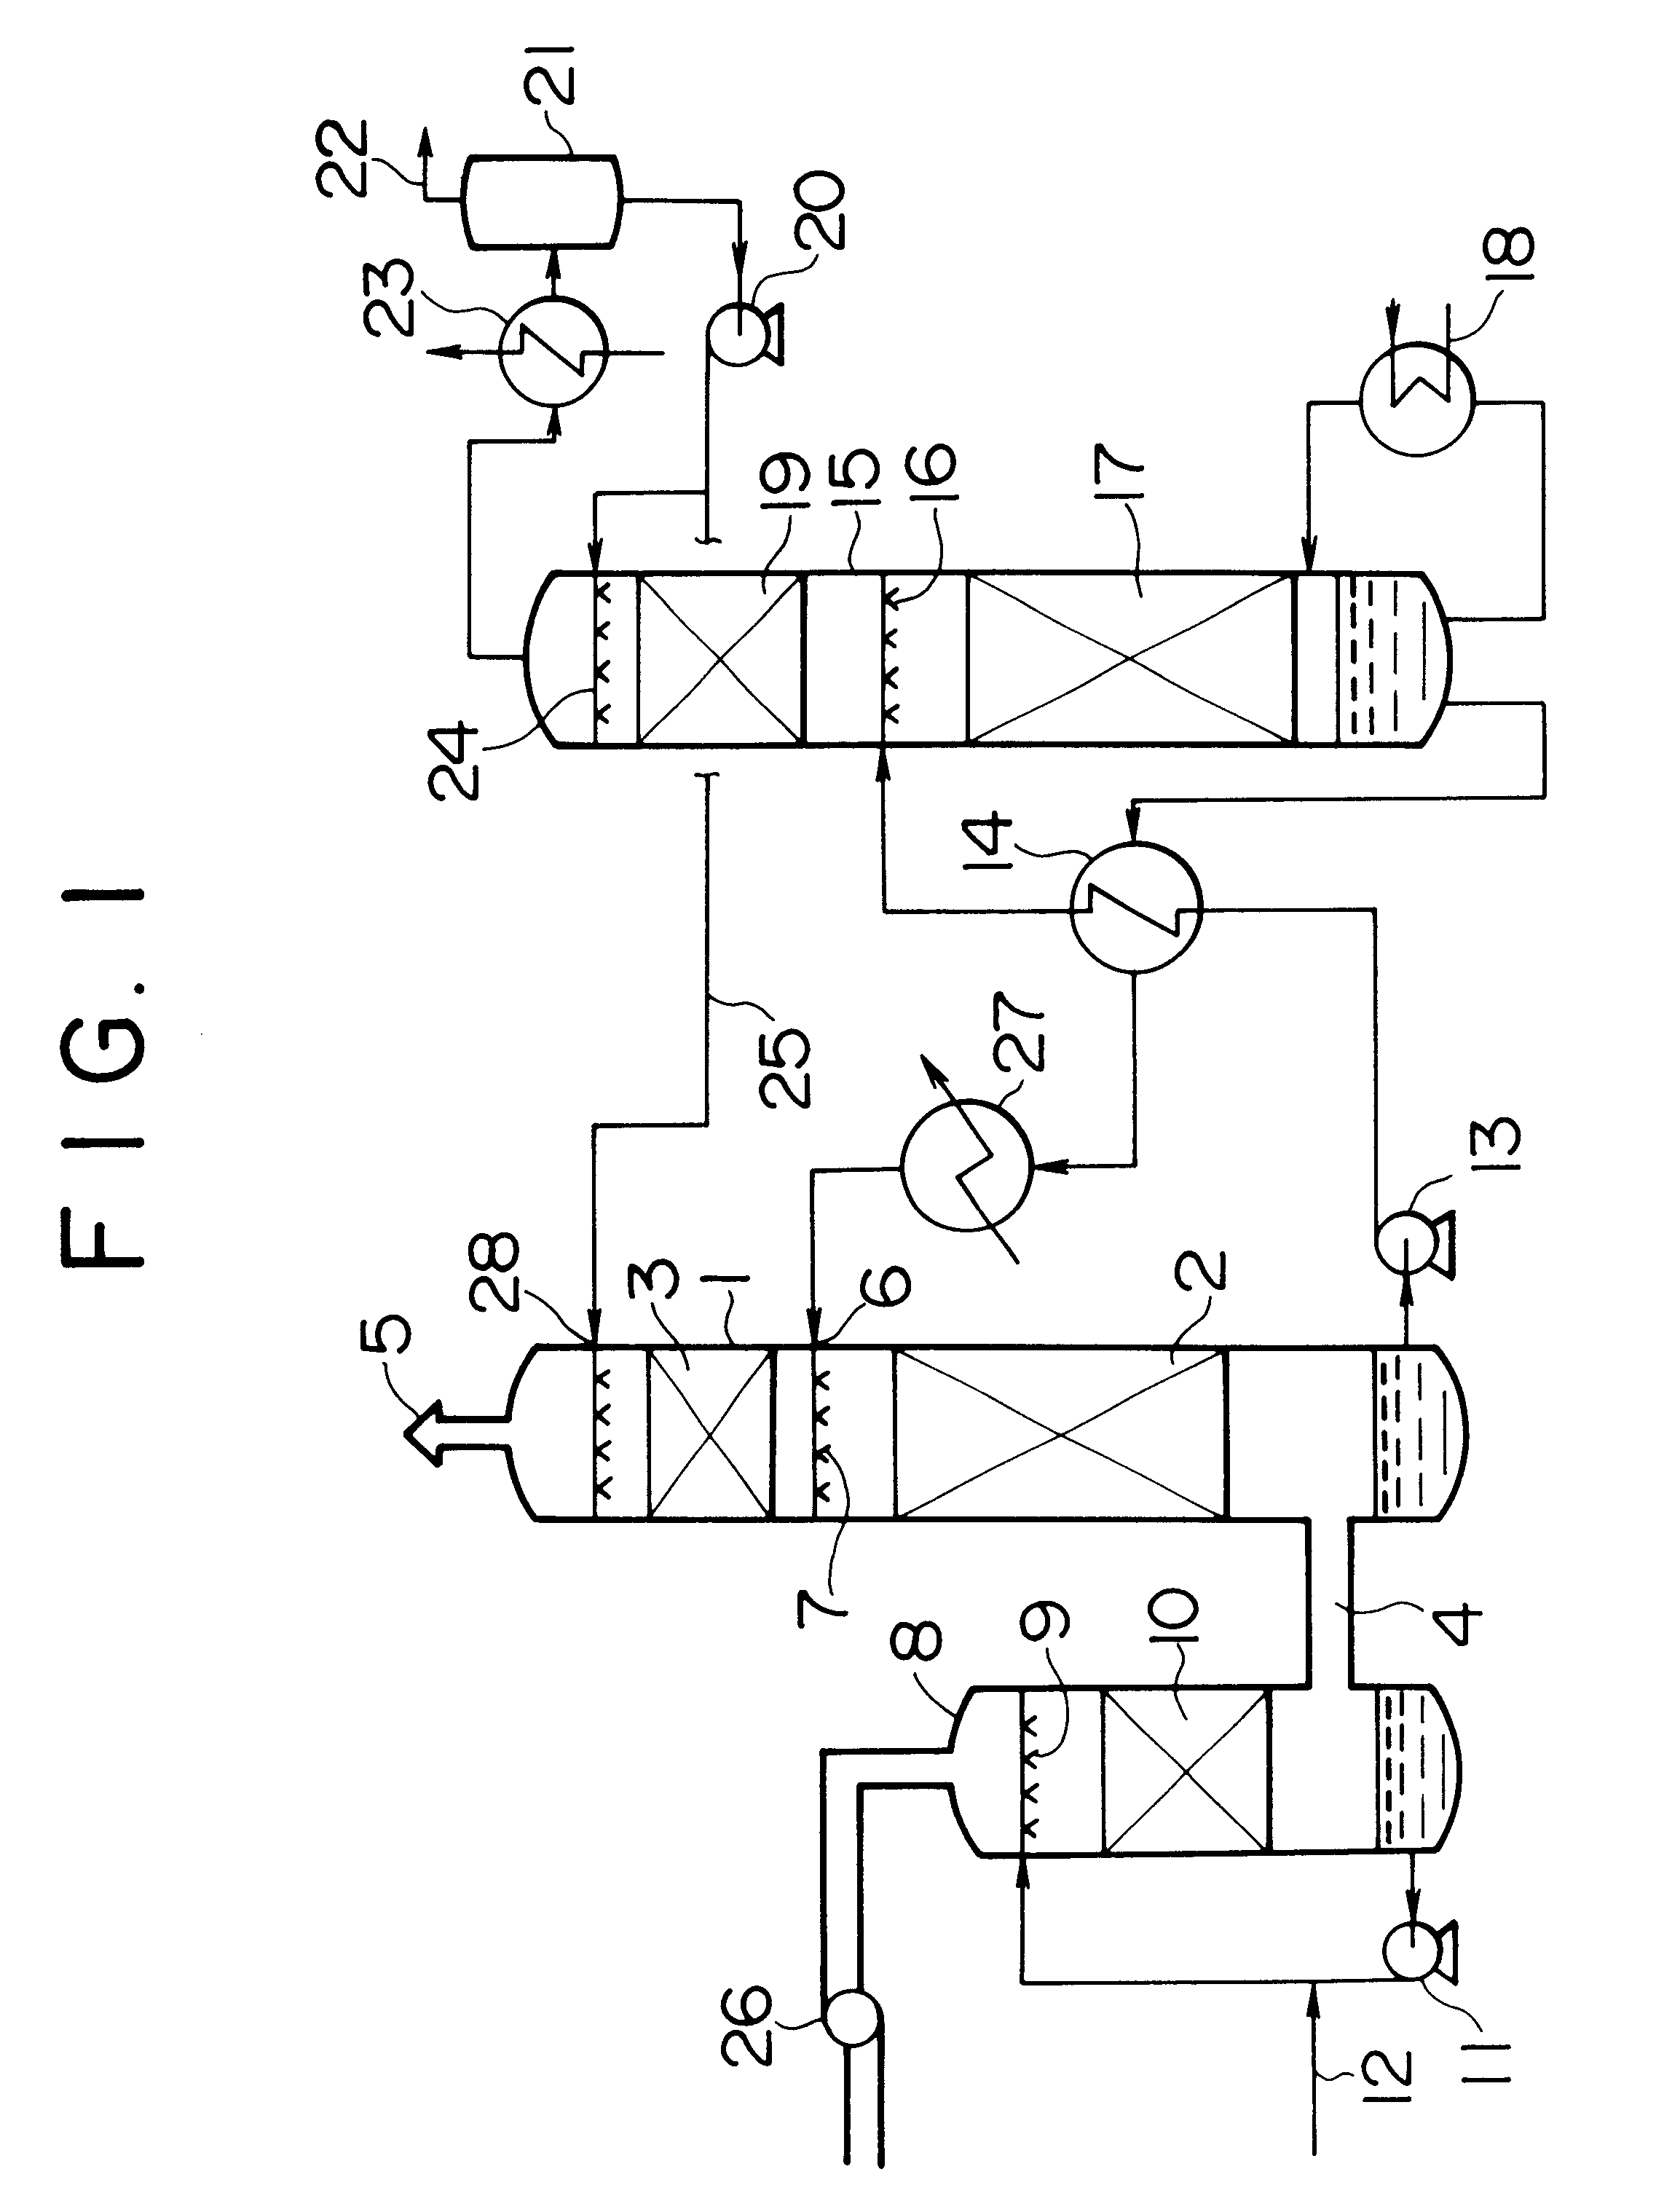 Method for removing carbon dioxide from combustion exhaust gas